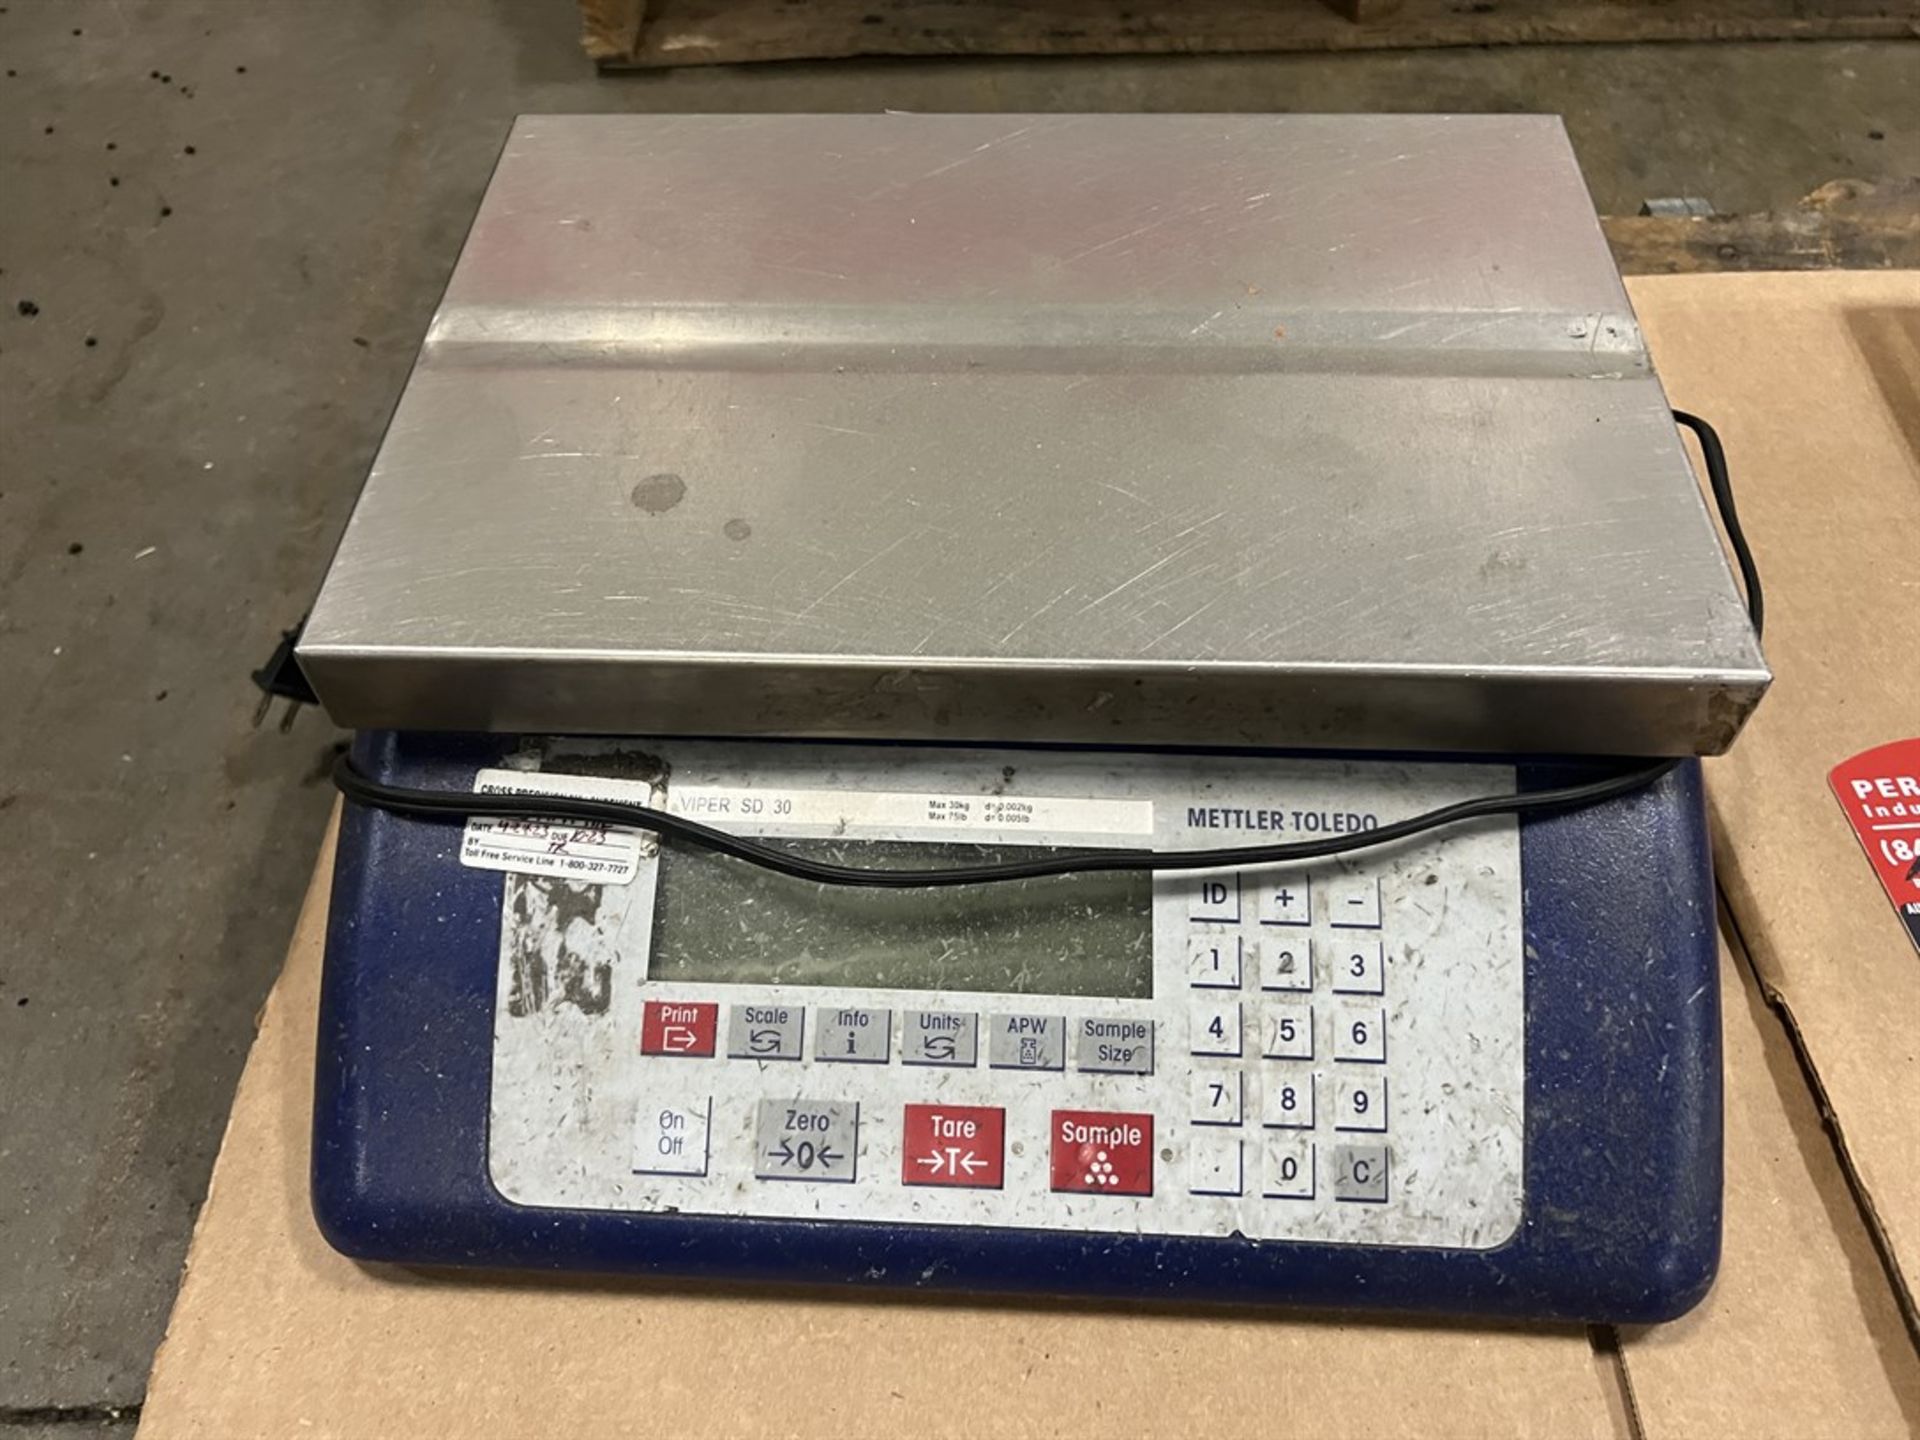 Lot Comprising METTLER TOLEDO Viper SD 30 and PENNSYLVANIA 7600 Digital Bench Top Scales - Image 3 of 3